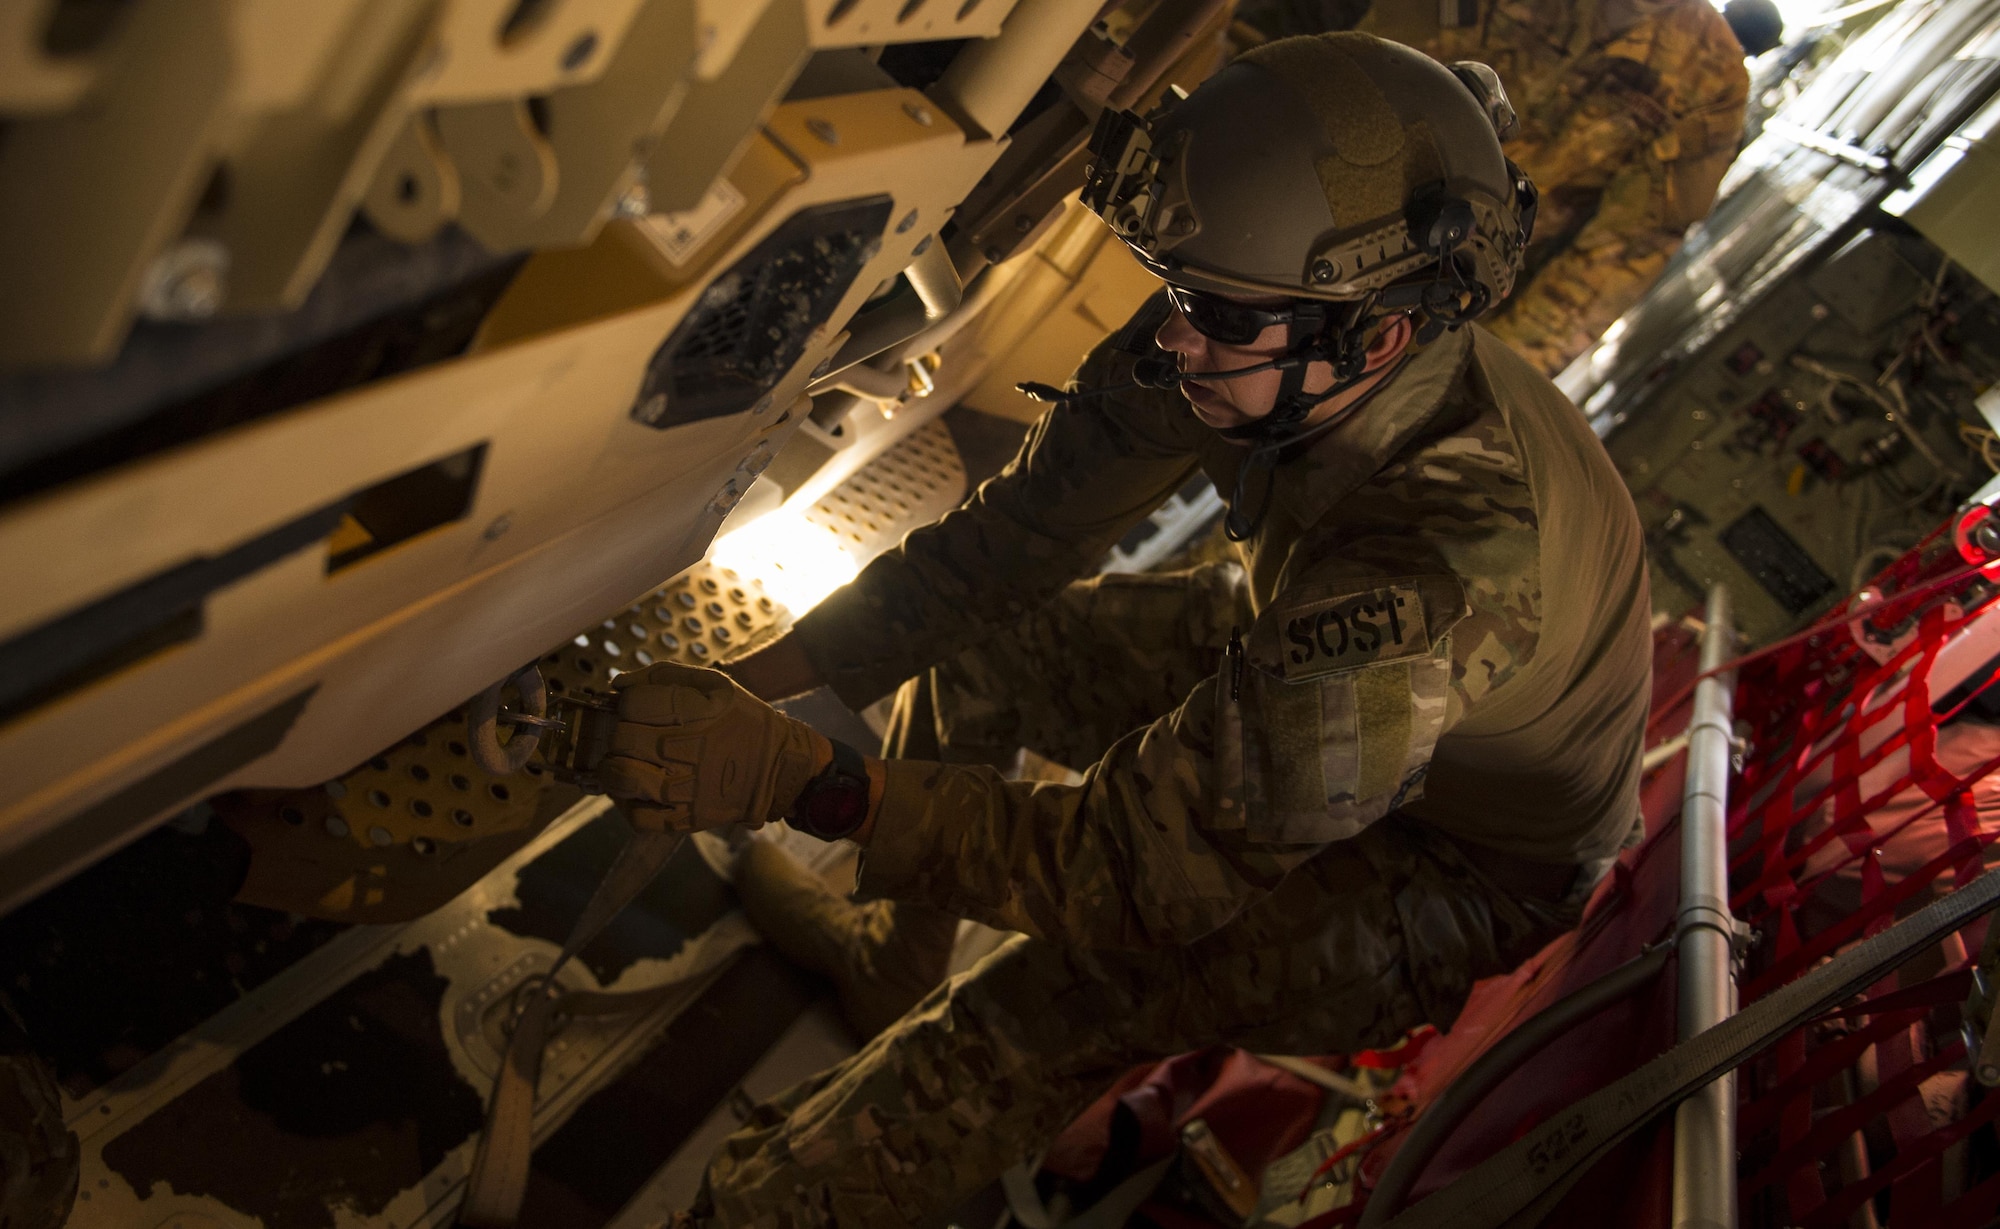 A U.S. Air Force Airman from the 24th Special Operations Wing trains during a static load exercise during Exercise Emerald Warrior at Hurlburt Field, Fla., Feb. 26, 2017. Emerald Warrior is the largest joint special operations exercise. U.S. Special Operations Command forces train to respond to various threats across the spectrum of conflict. (U.S. Air Force photo by Senior Airman Erin Piazza)